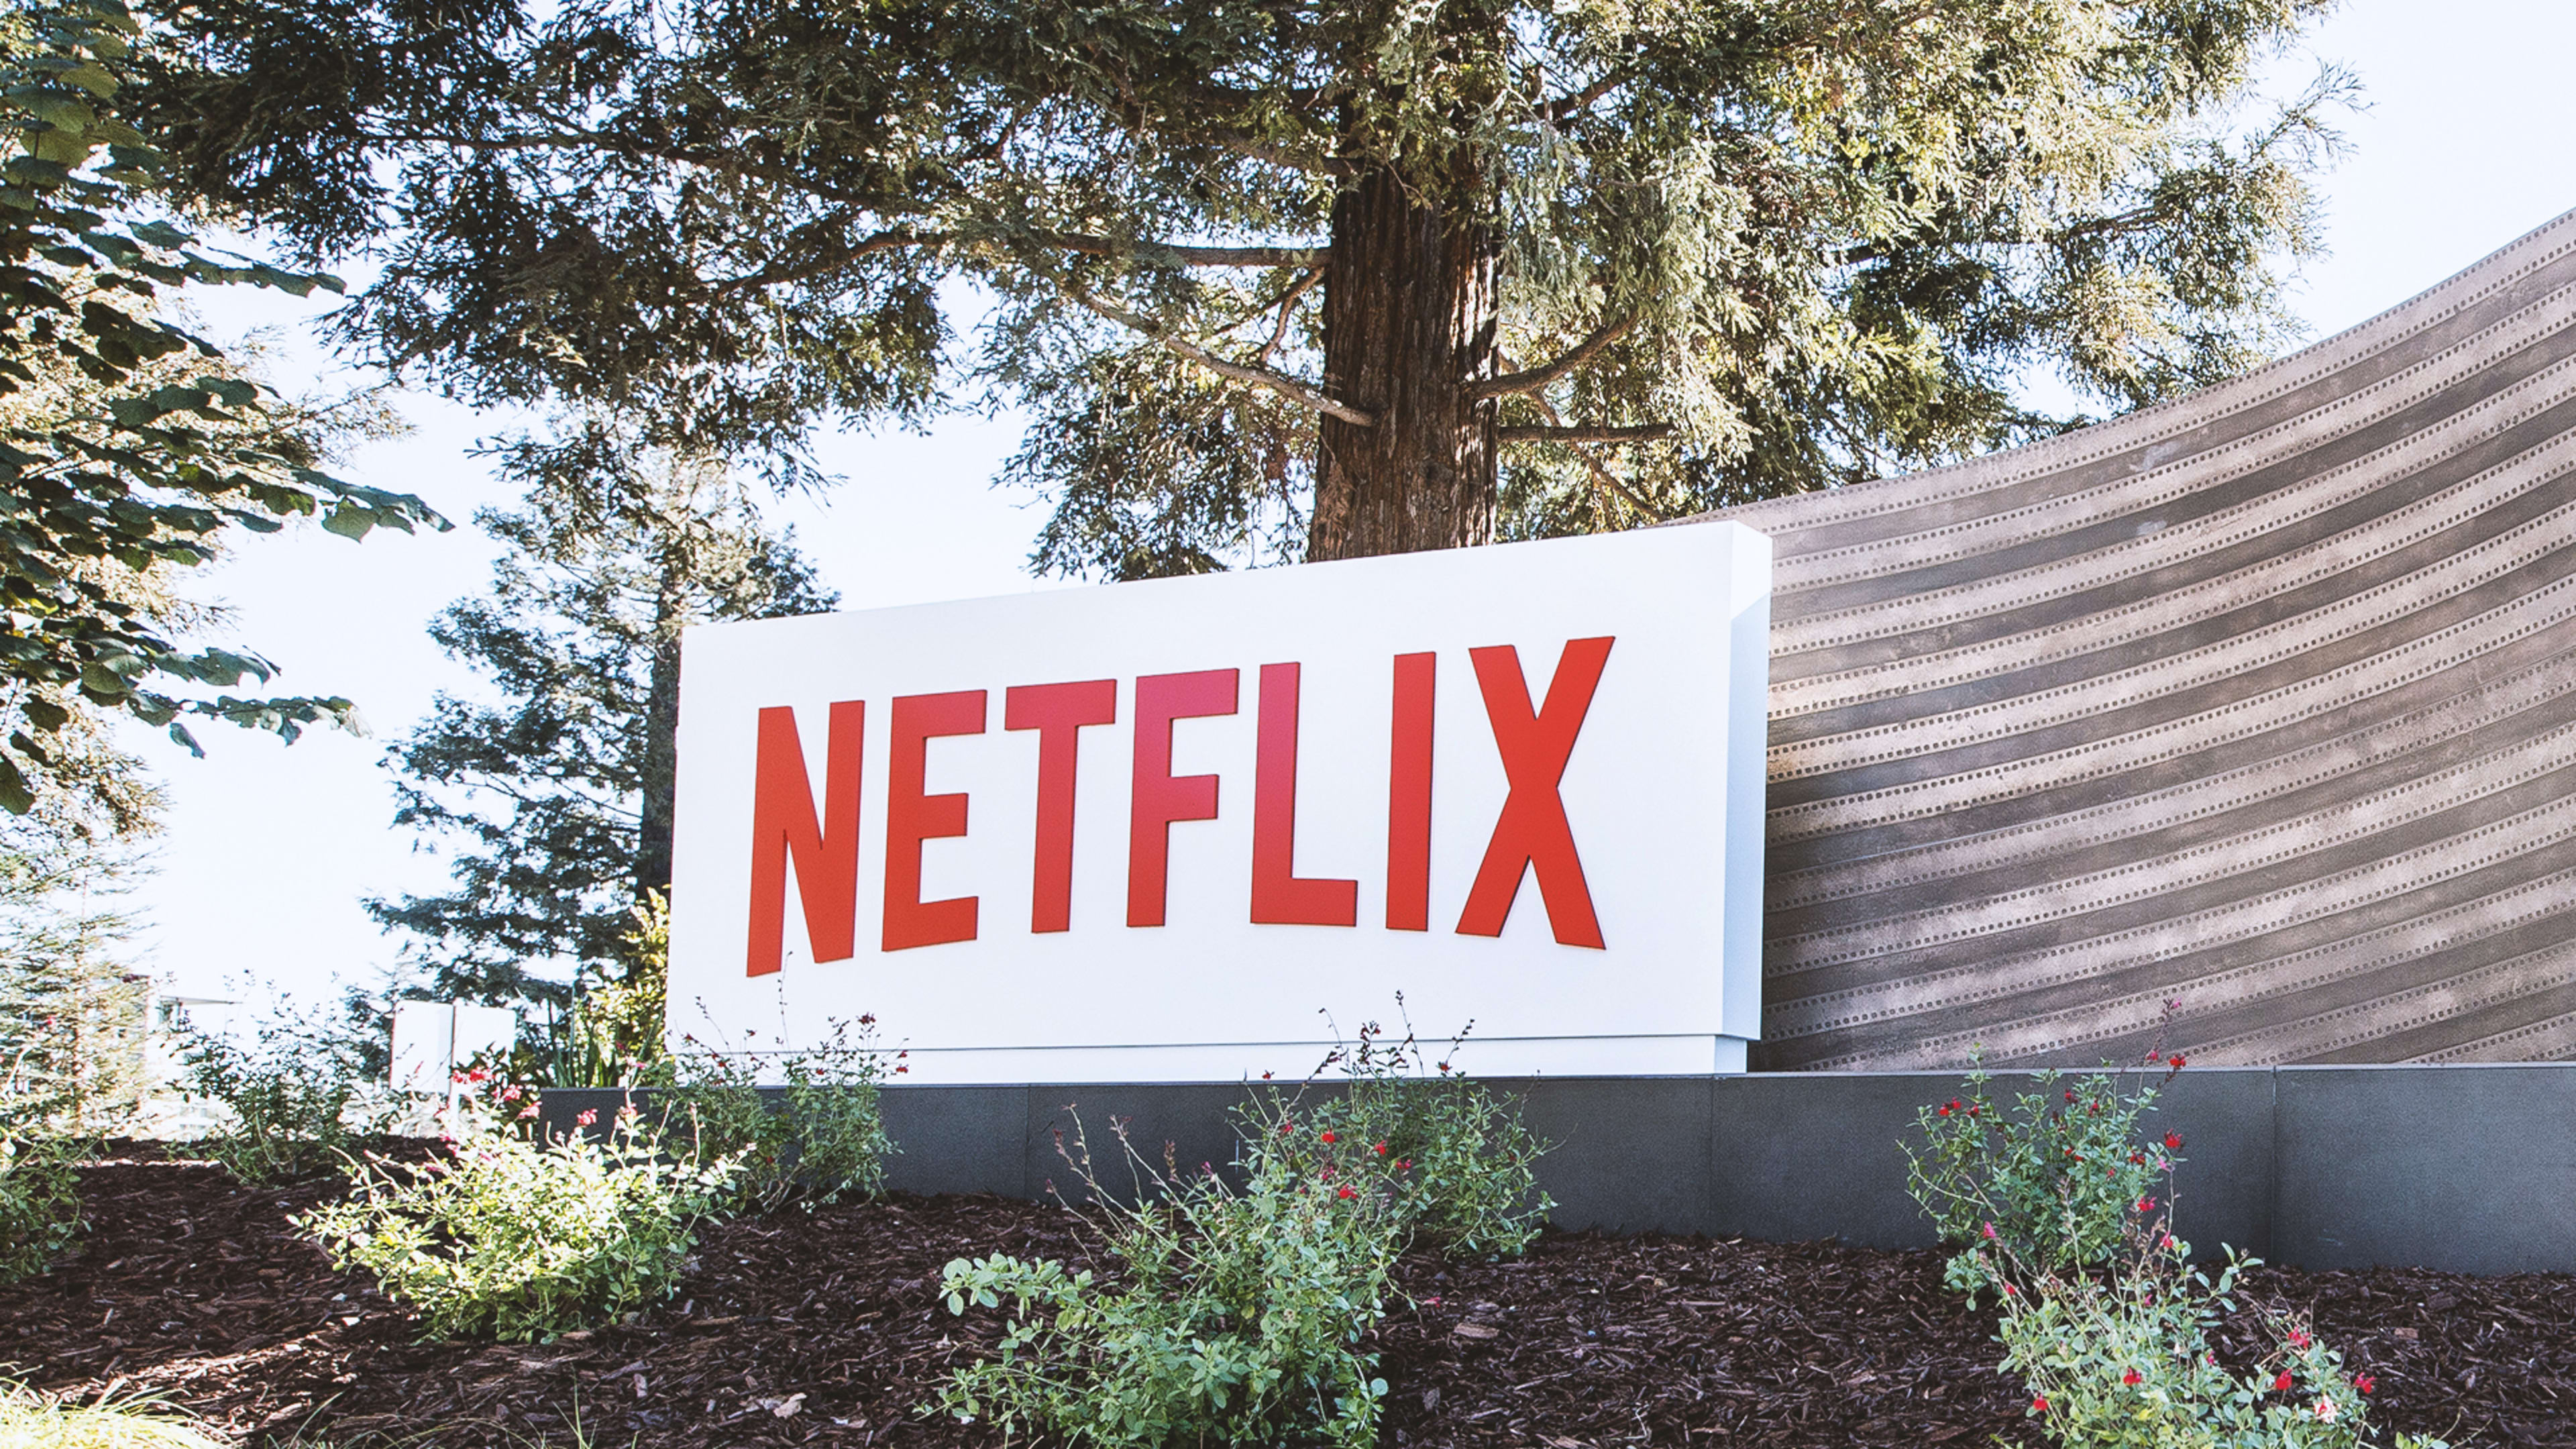 After earnings report, Netflix stock fell despite overall beat